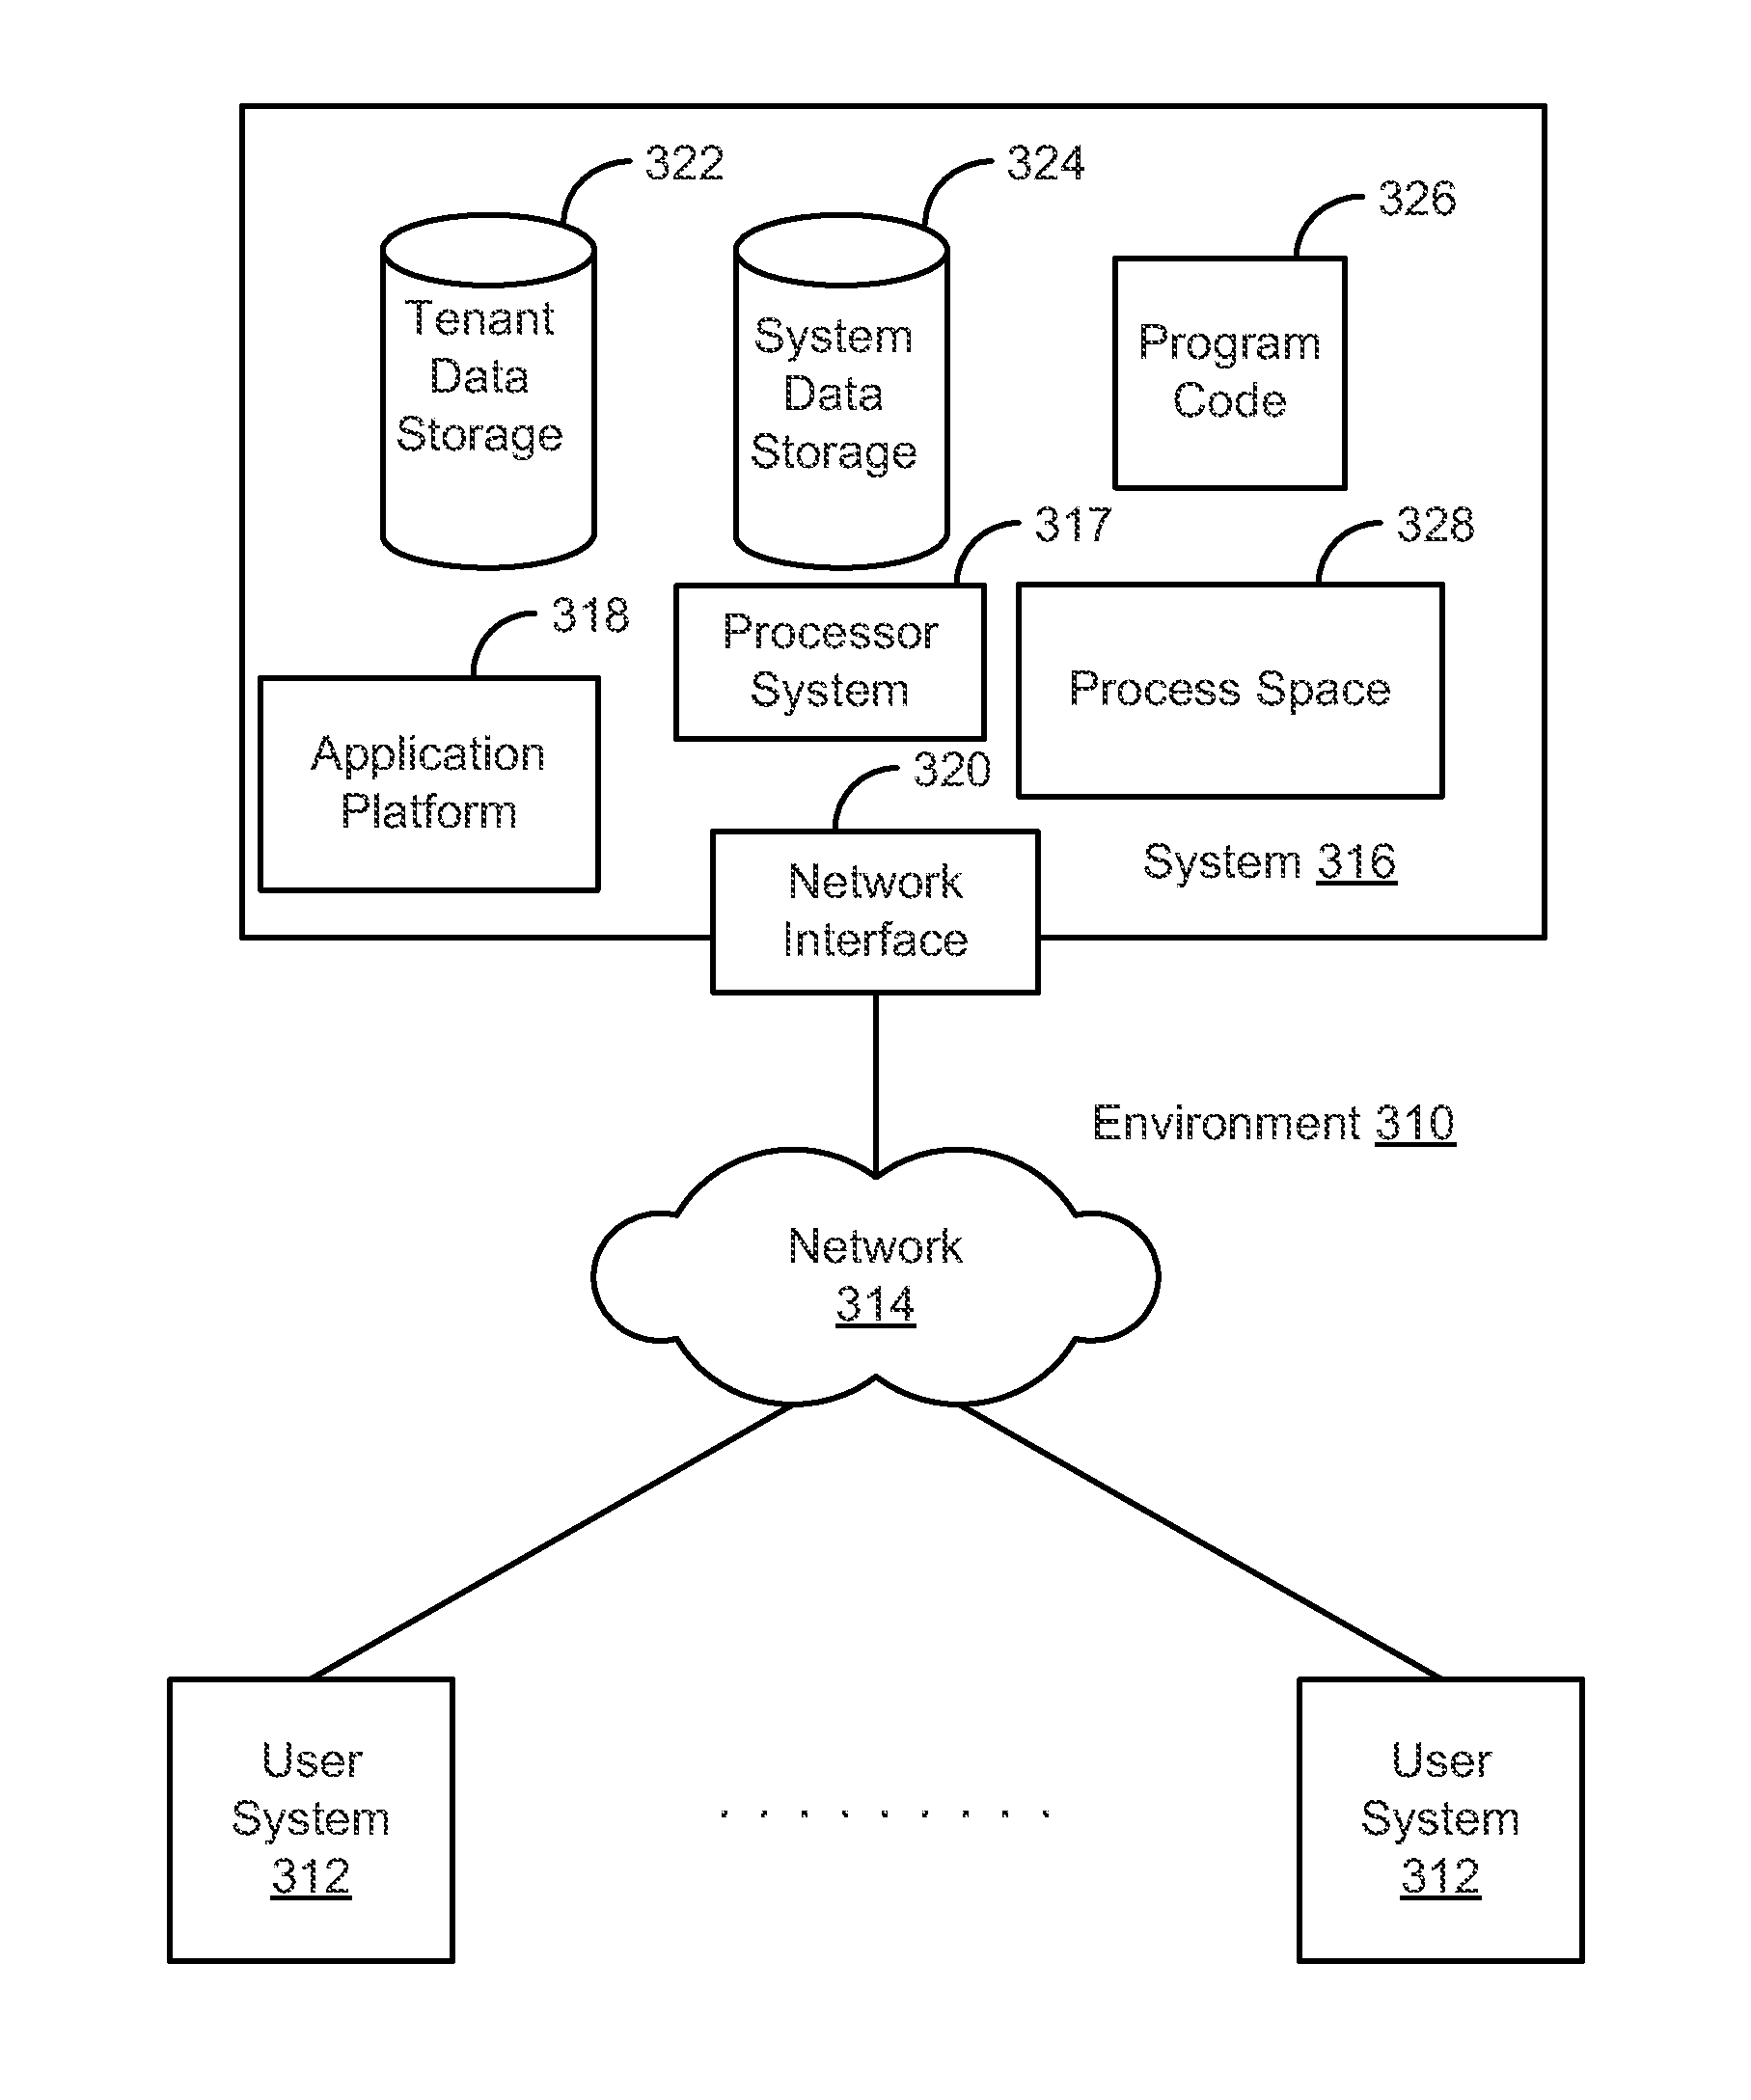 System, method and computer program product for conditionally performing garbage collection